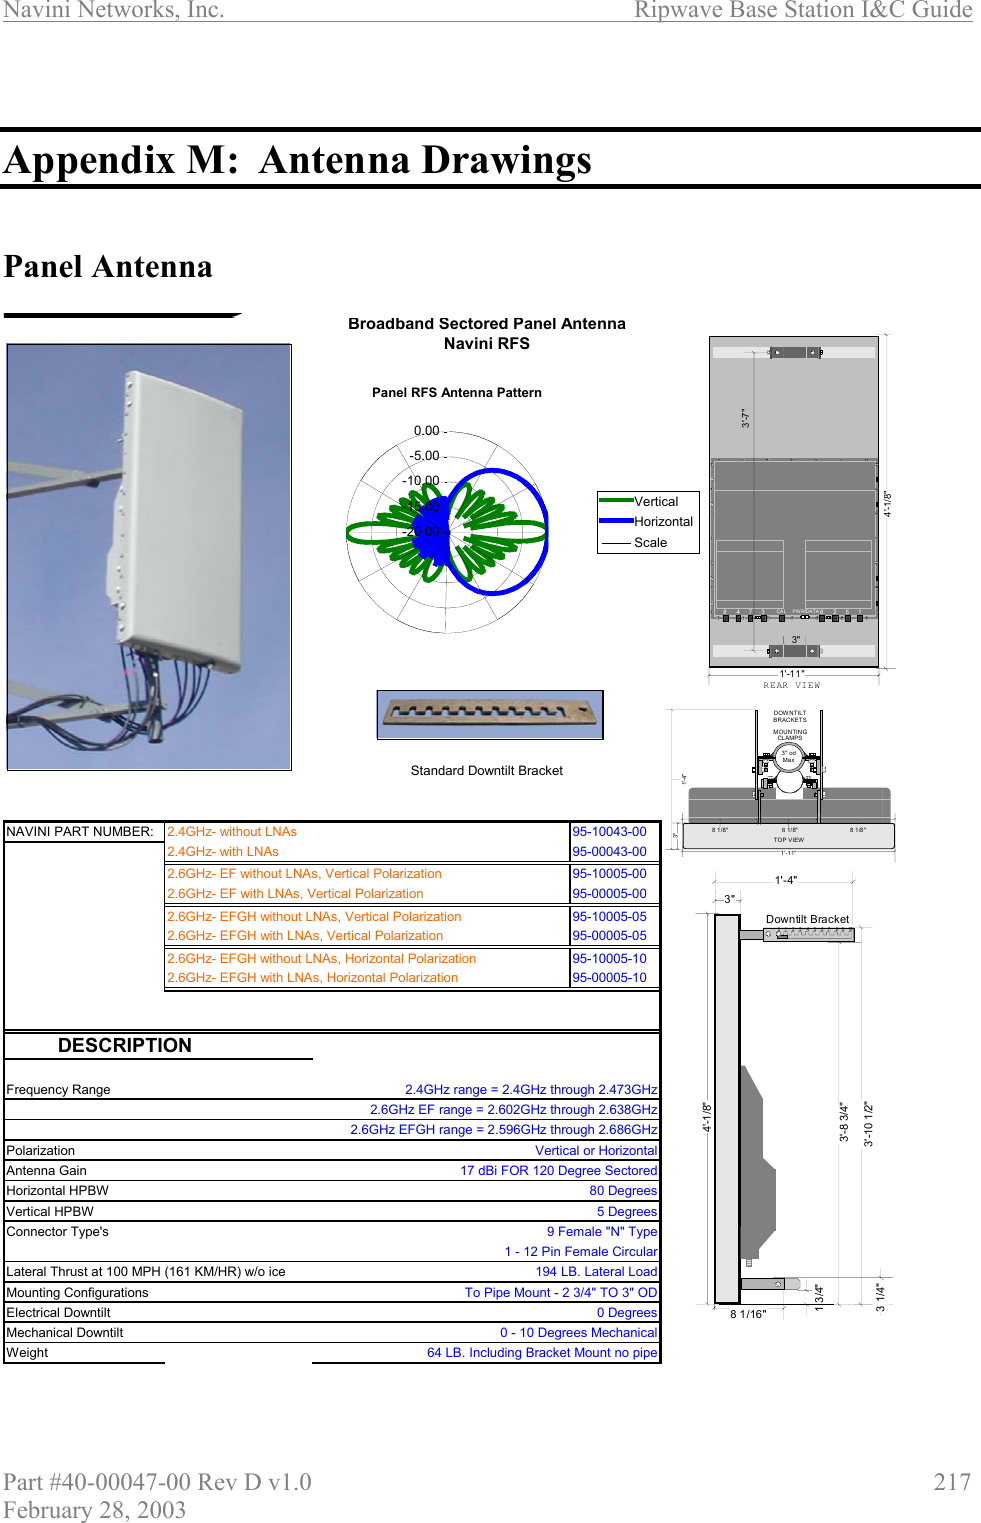 Navini Networks, Inc.                          Ripwave Base Station I&amp;C Guide Part #40-00047-00 Rev D v1.0                     217 February 28, 2003   Appendix M:  Antenna Drawings   Panel Antenna   95-10043-0095-00043-0095-10005-0095-00005-0095-10005-0595-00005-0595-10005-1095-00005-10DESCRIPTIONFrequency RangePolarizationAntenna GainHorizontal HPBWVertical HPBWConnector Type&apos;sLateral Thrust at 100 MPH (161 KM/HR) w/o iceMounting ConfigurationsElectrical DowntiltMechanical DowntiltWeight 64 LB. Including Bracket Mount no pipeBroadband Sectored Panel AntennaNavini RFS194 LB. Lateral LoadTo Pipe Mount - 2 3/4&quot; TO 3&quot; OD0 Degrees0 - 10 Degrees MechanicalStandard Downtilt Bracket9 Female &quot;N&quot; Type1 - 12 Pin Female CircularNAVINI PART NUMBER:2.6GHz EF range = 2.602GHz through 2.638GHz17 dBi FOR 120 Degree Sectored5 Degrees2.4GHz range = 2.4GHz through 2.473GHz2.6GHz EFGH range = 2.596GHz through 2.686GHzVertical or Horizontal80 Degrees2.6GHz- EFGH without LNAs, Horizontal Polarization2.6GHz- EFGH with LNAs, Horizontal Polarization2.6GHz- EFGH without LNAs, Vertical Polarization2.6GHz- EFGH with LNAs, Vertical Polarization2.4GHz- without LNAs2.4GHz- with LNAs2.6GHz- EF without LNAs, Vertical Polarization2.6GHz- EF with LNAs, Vertical Polarization3&quot; o dMax3&quot;1&apos;-11&quot;1&apos;-4&quot;DOWNTILTBRACKETS8 1/ 8&quot; 8 1/8&quot;6 1/8&quot;TOP VIEWMOUNTINGCLAMP S3&quot; odMax4&apos;-1/ 8&quot;1 3/4&quot;3&apos;-8 3/4&quot;1&apos;-4&quot;3&quot;8 1/16&quot;3&apos;-10 1/2&quot;3 1/4&quot;Downtilt Bracket0      1       2      3       4      5       6      7       8     9      10REAR VIEW4&apos;-1/8&quot;18743CAL PW R/DA TA 6523&quot;1&apos;-11&quot;3&apos;-7&quot;Panel RFS Antenna Pattern-20.00-15.00-10.00-5.000.00VerticalHorizontalScale